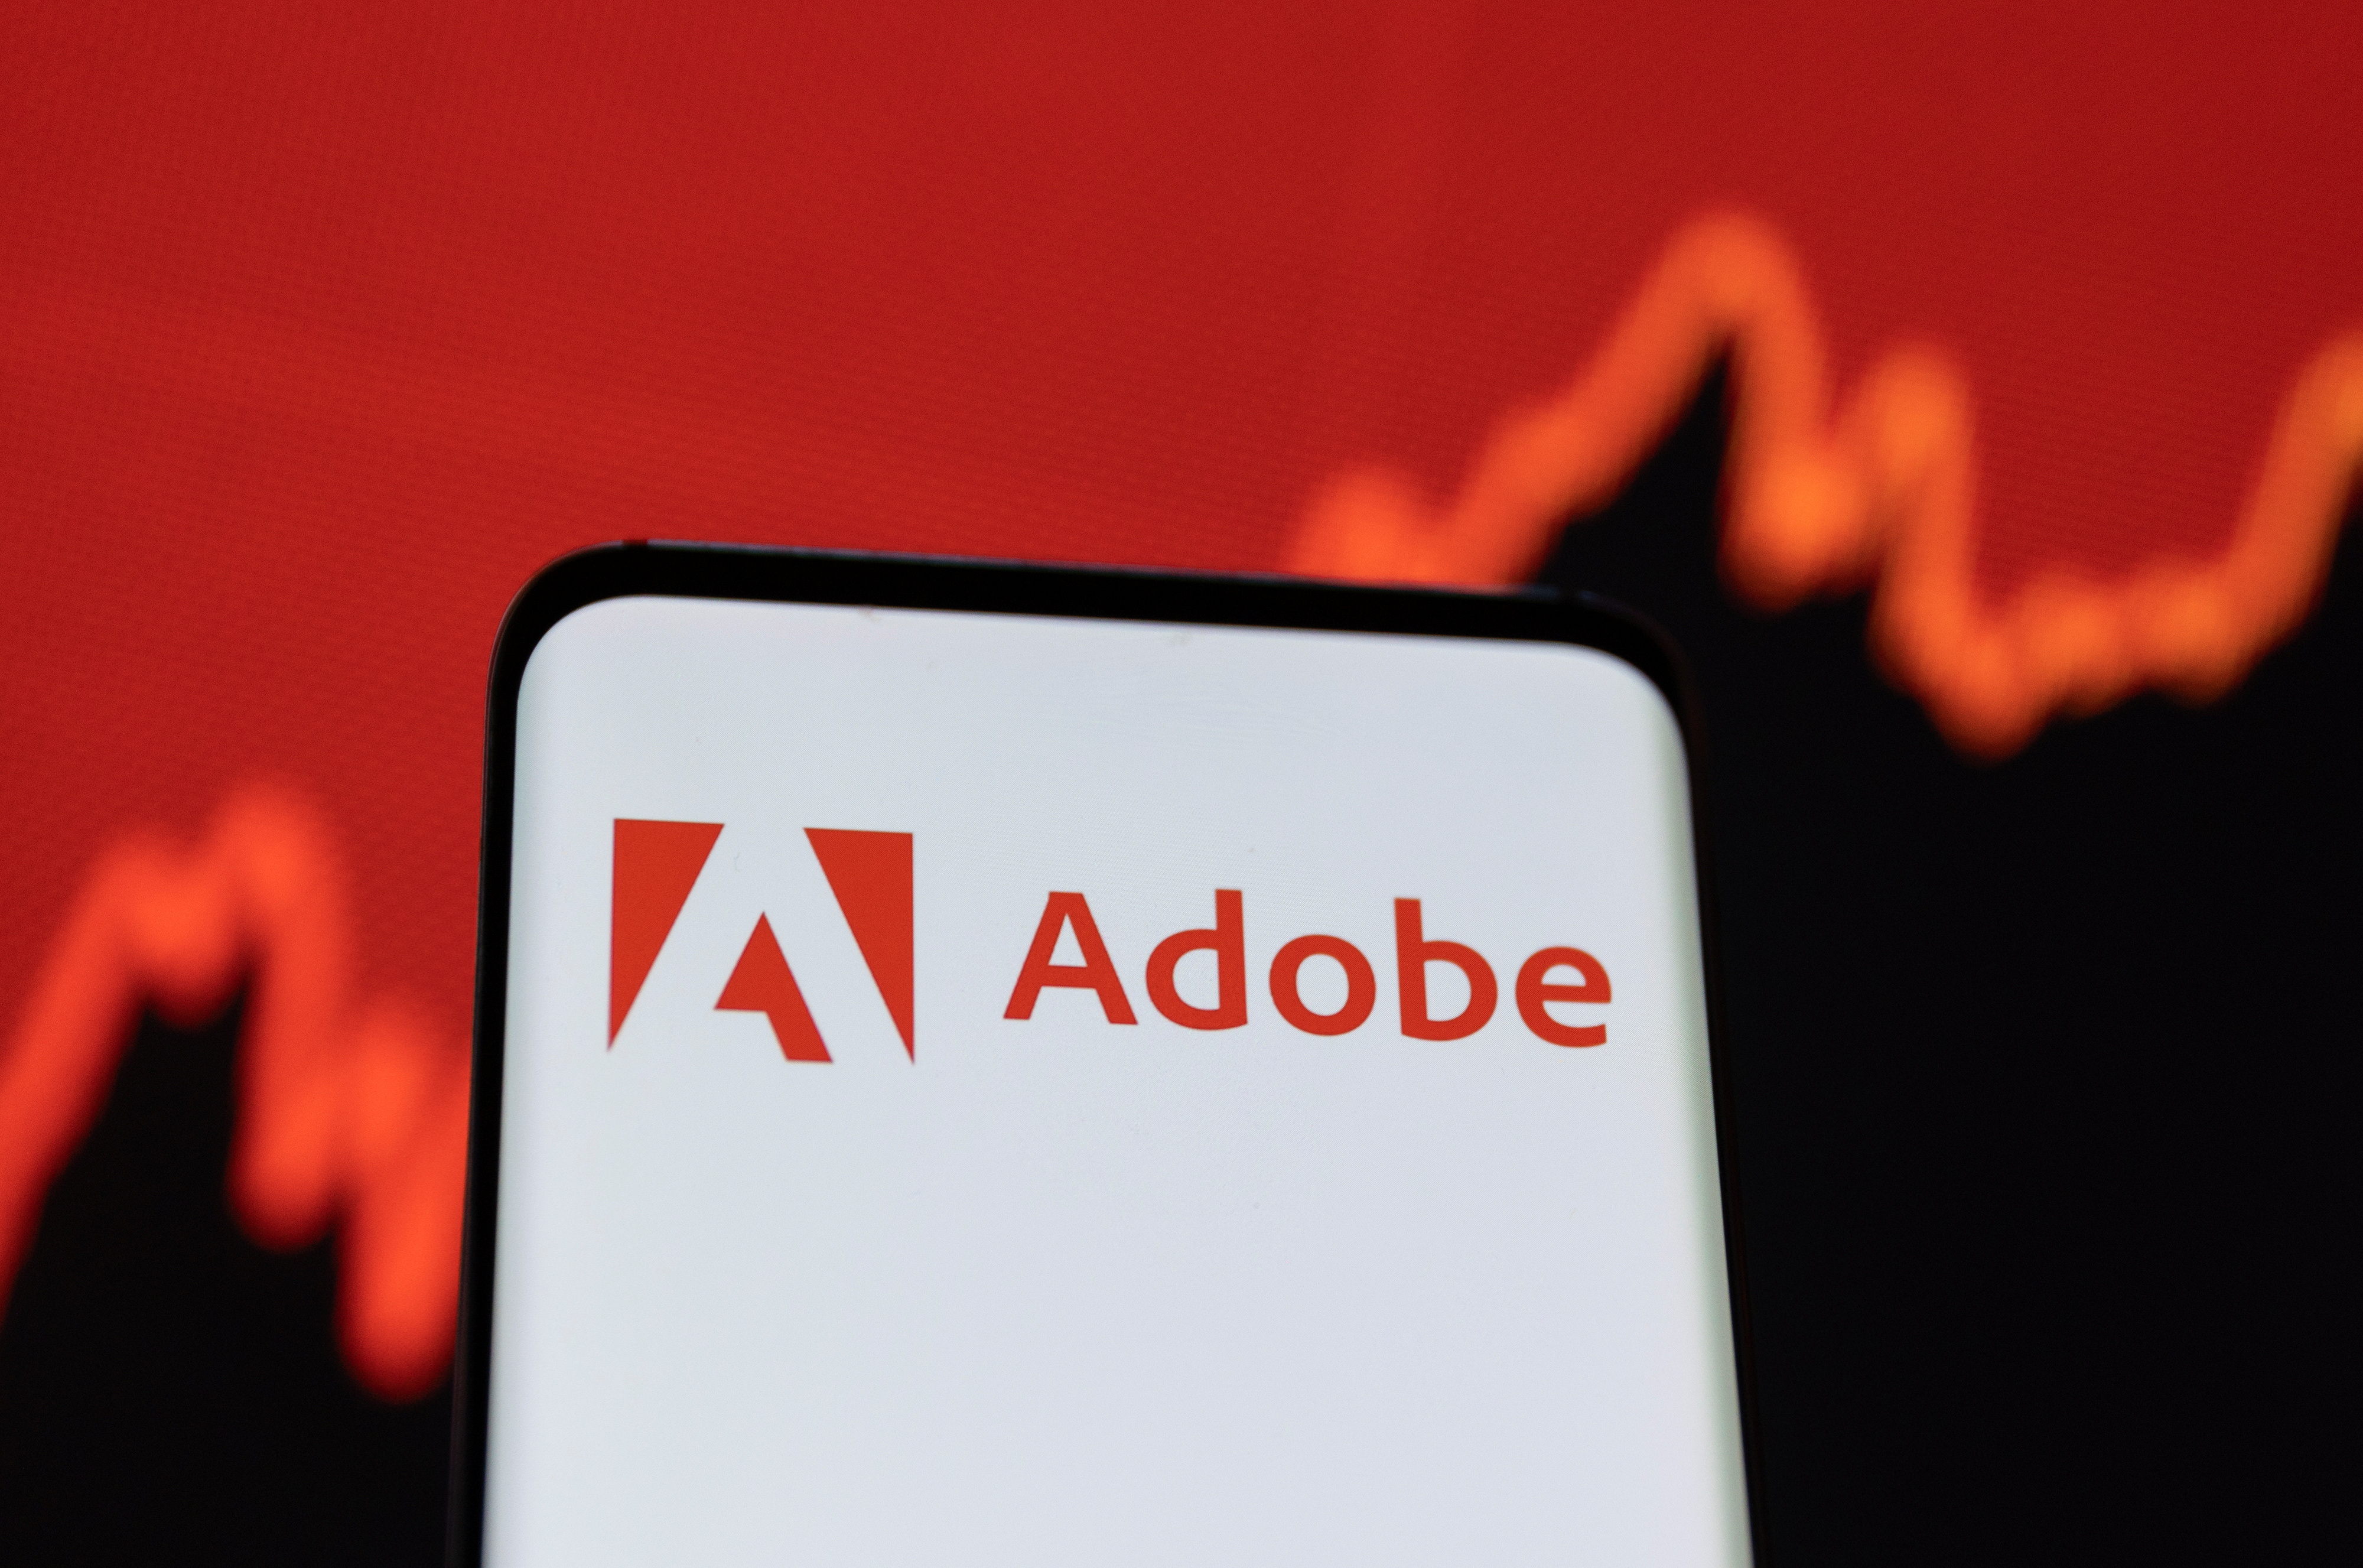 Illustration shows Adobe logo and stock graph